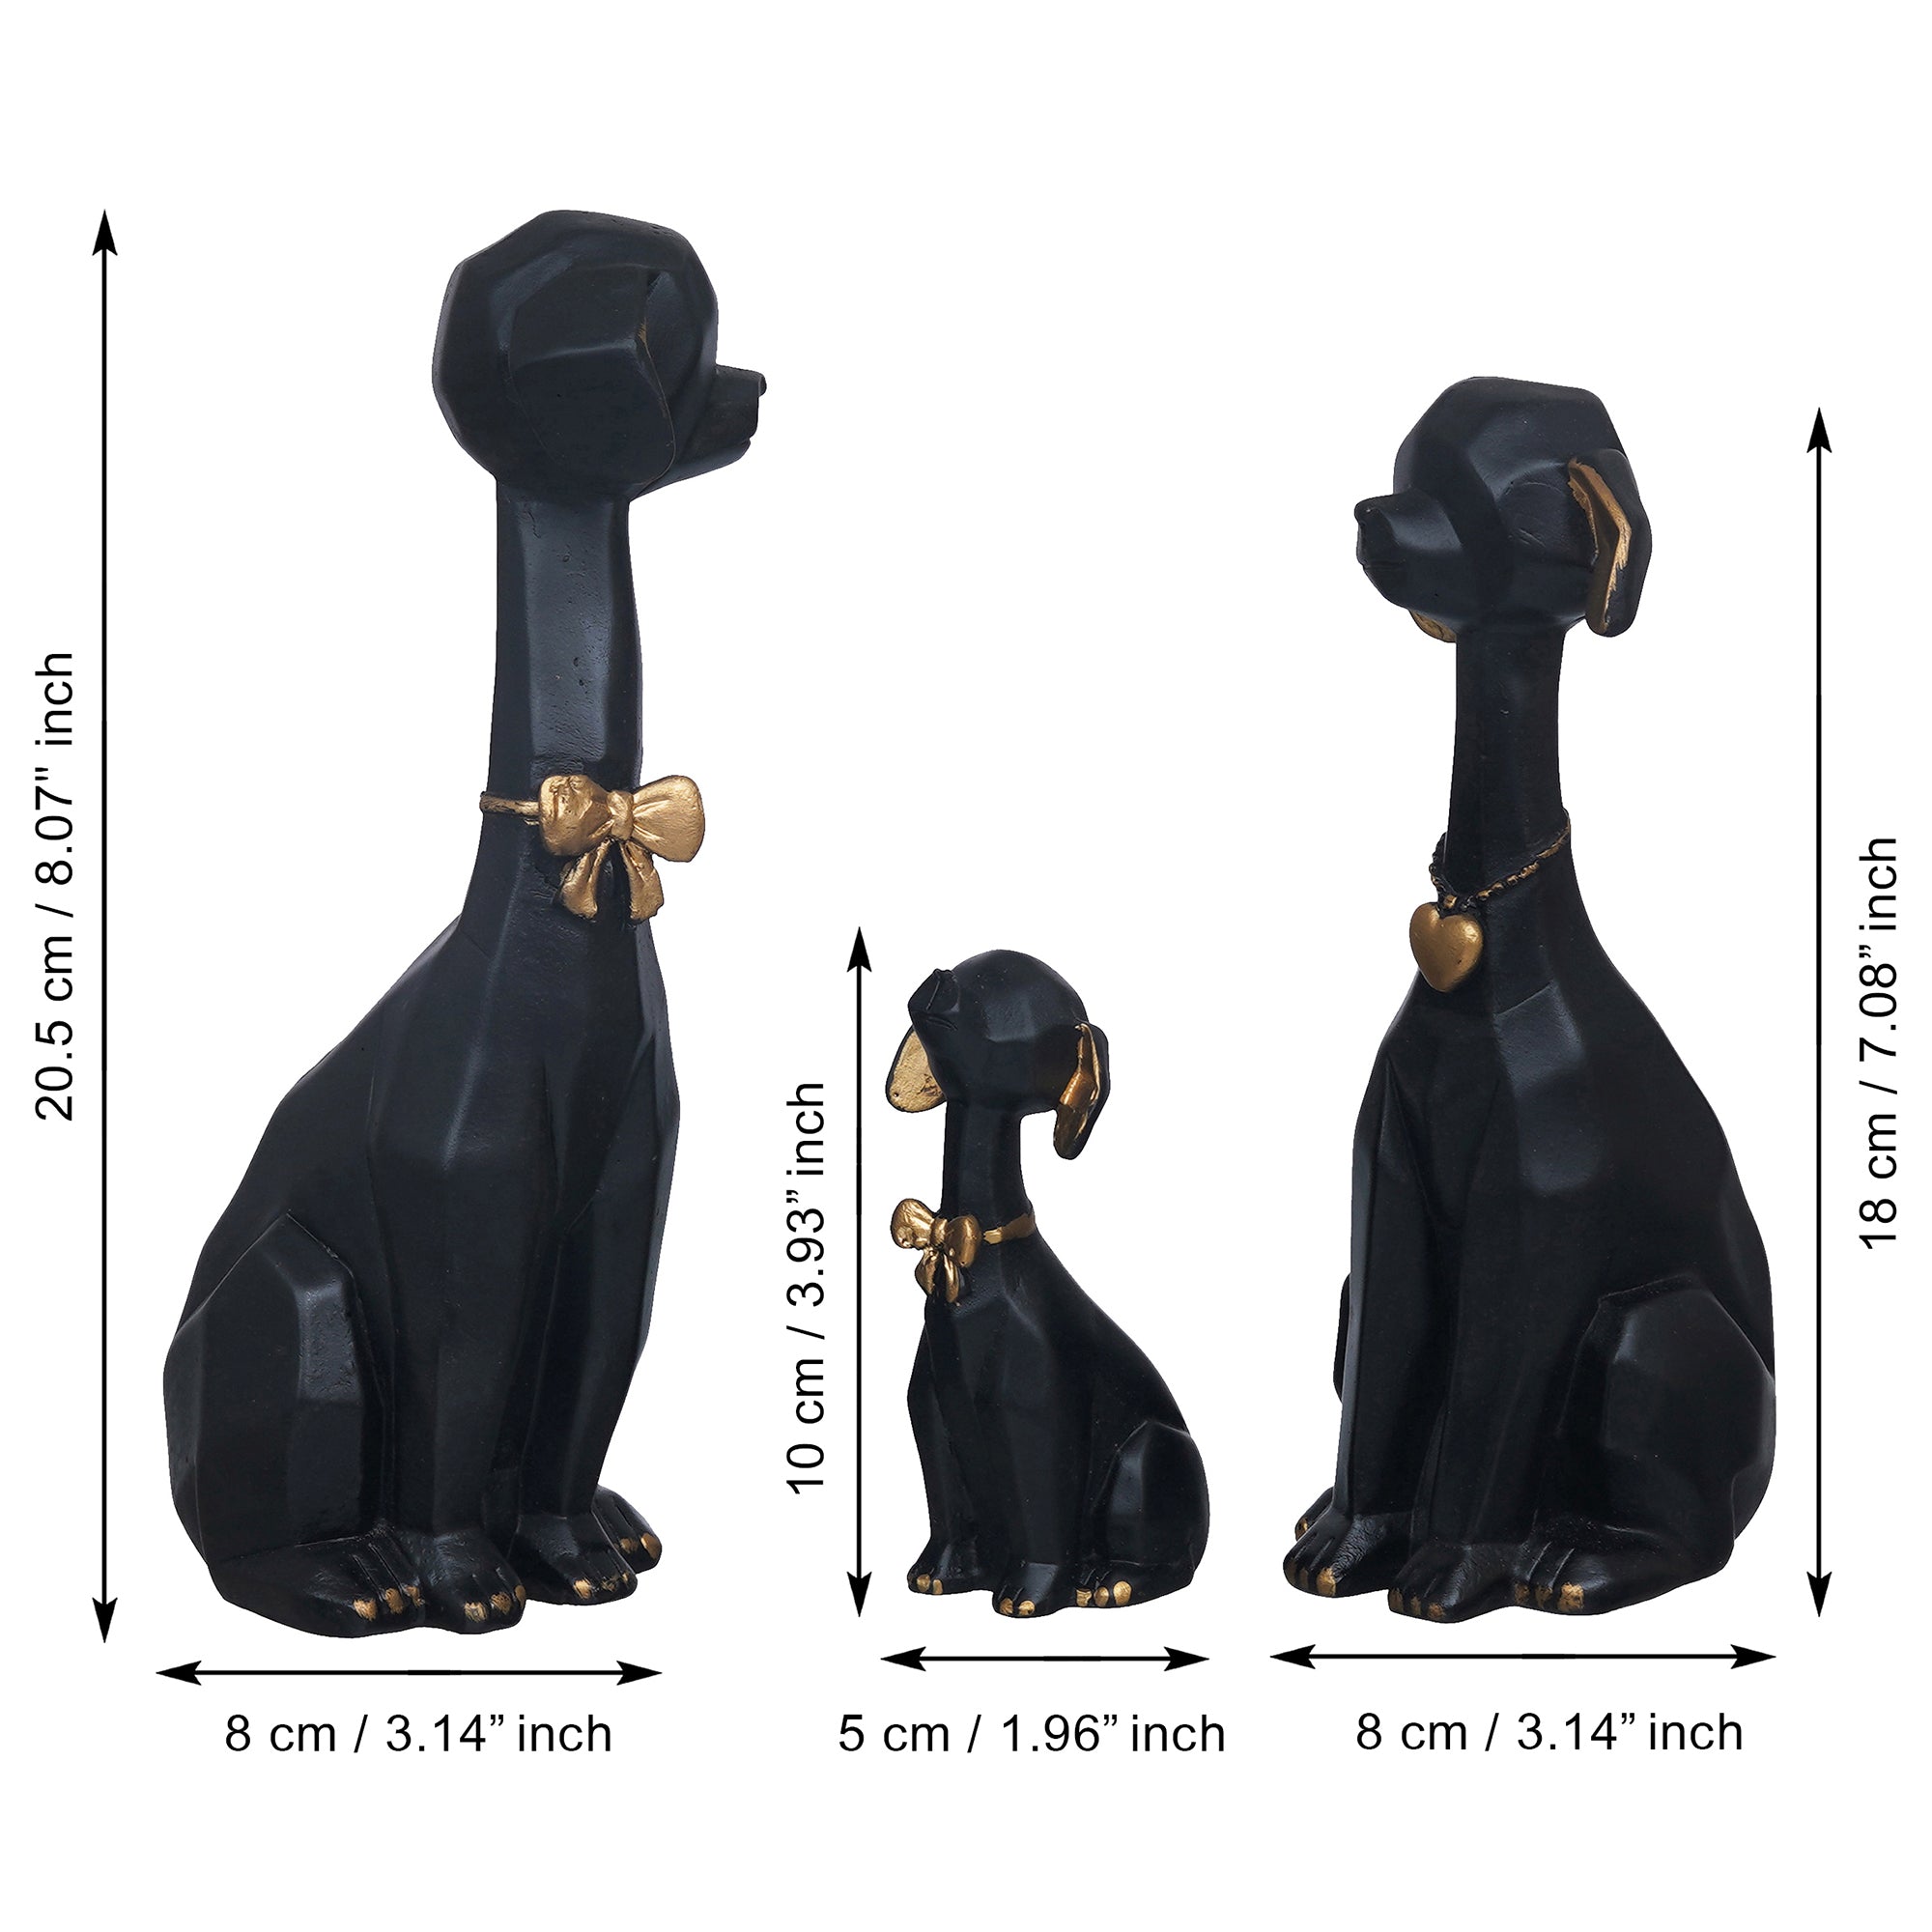 eCraftIndia Black and Golden Set of 3 Cute Dog Statues Animal Figurines Decorative Showpieces for Home Decor 3